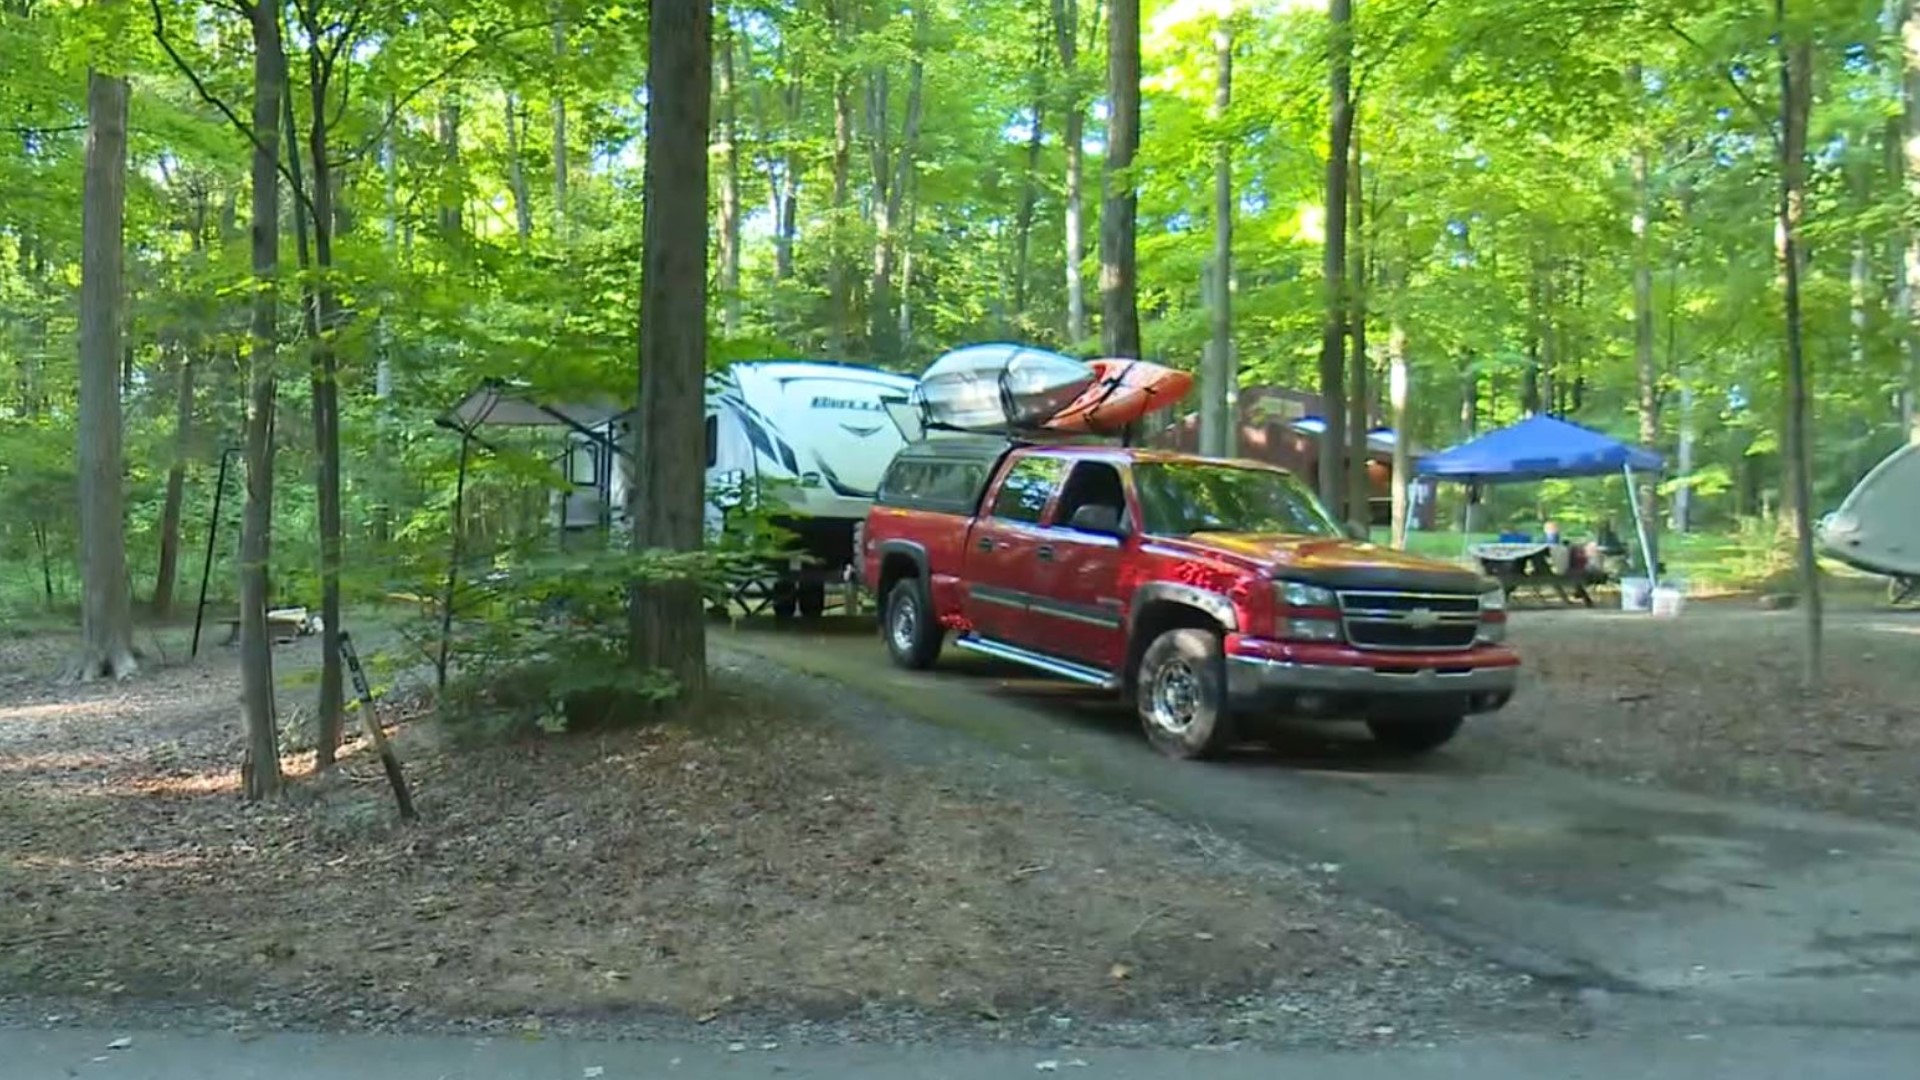 Warmer weather means camping season is just around the corner, and state park officials are bracing for another busy year.